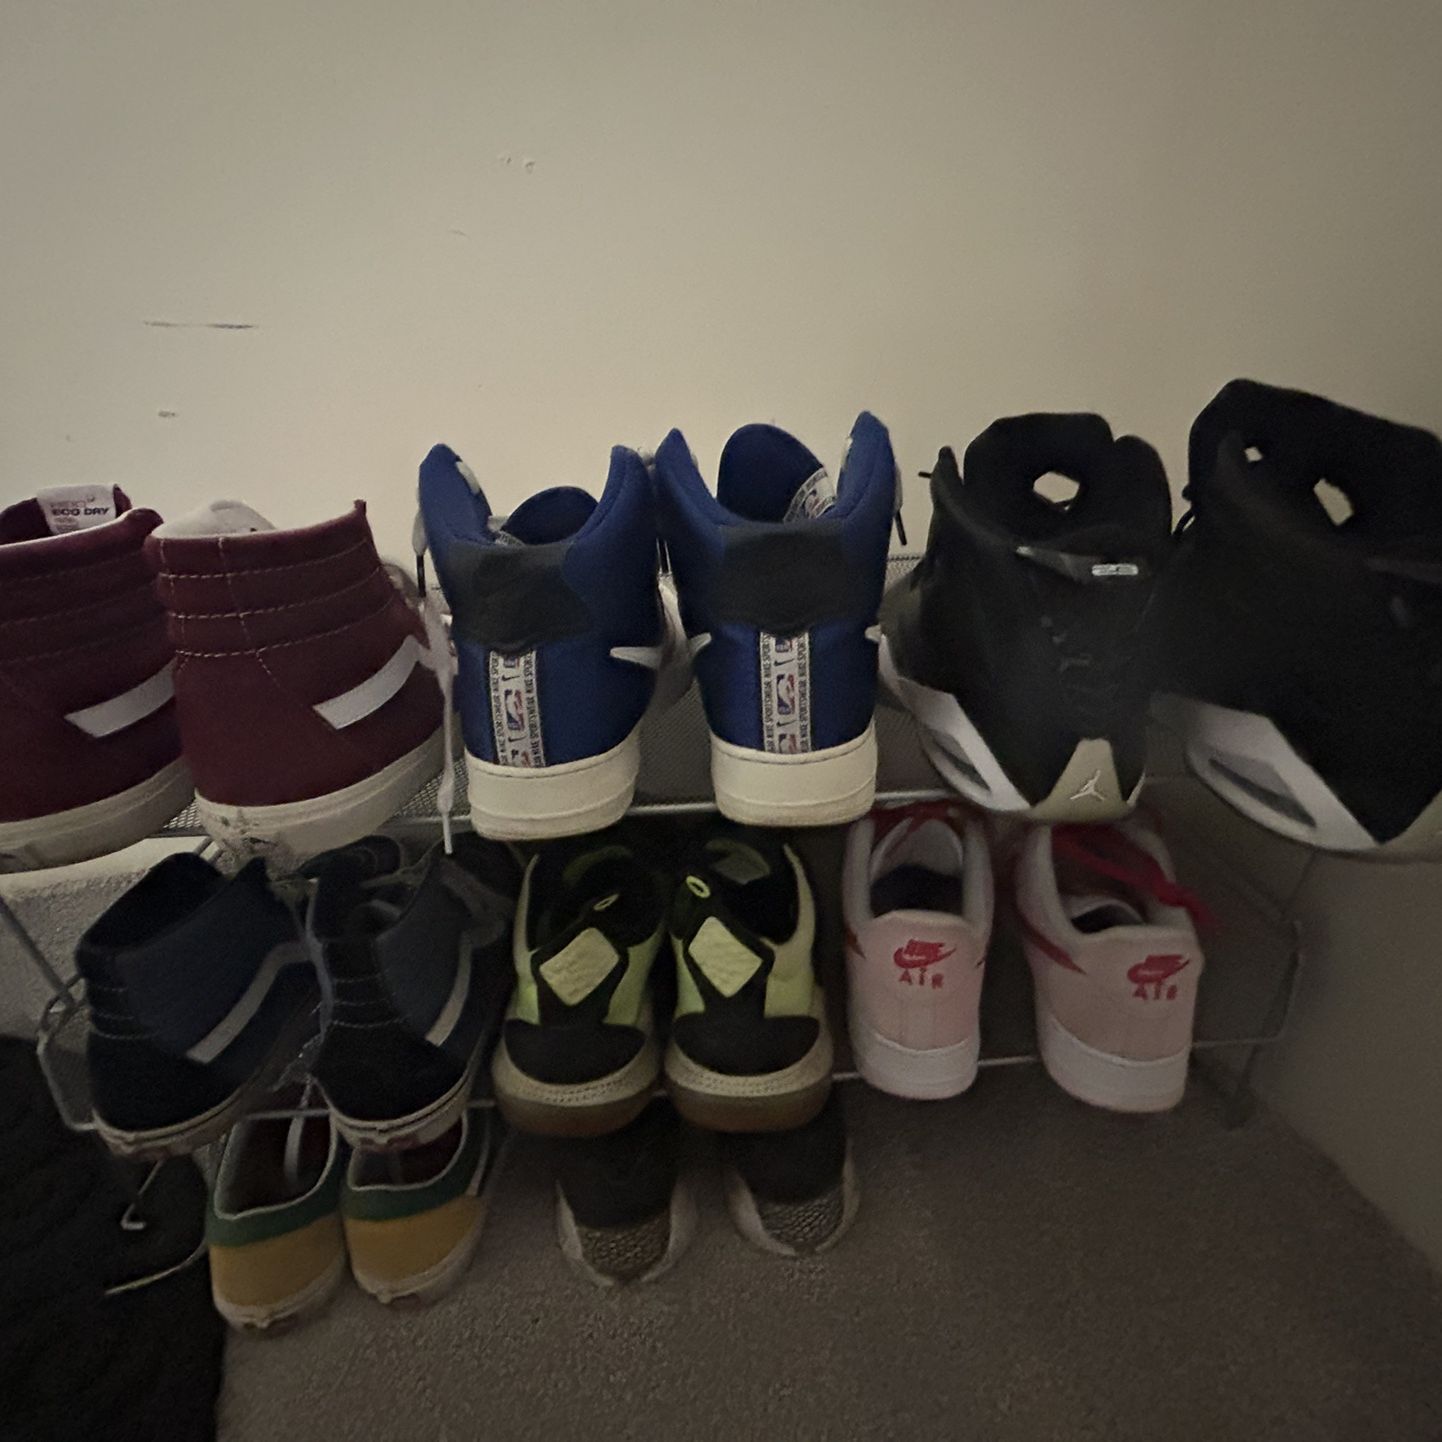 8 Pairs of shoes sizes 8.5-10 Air Forces Jordan